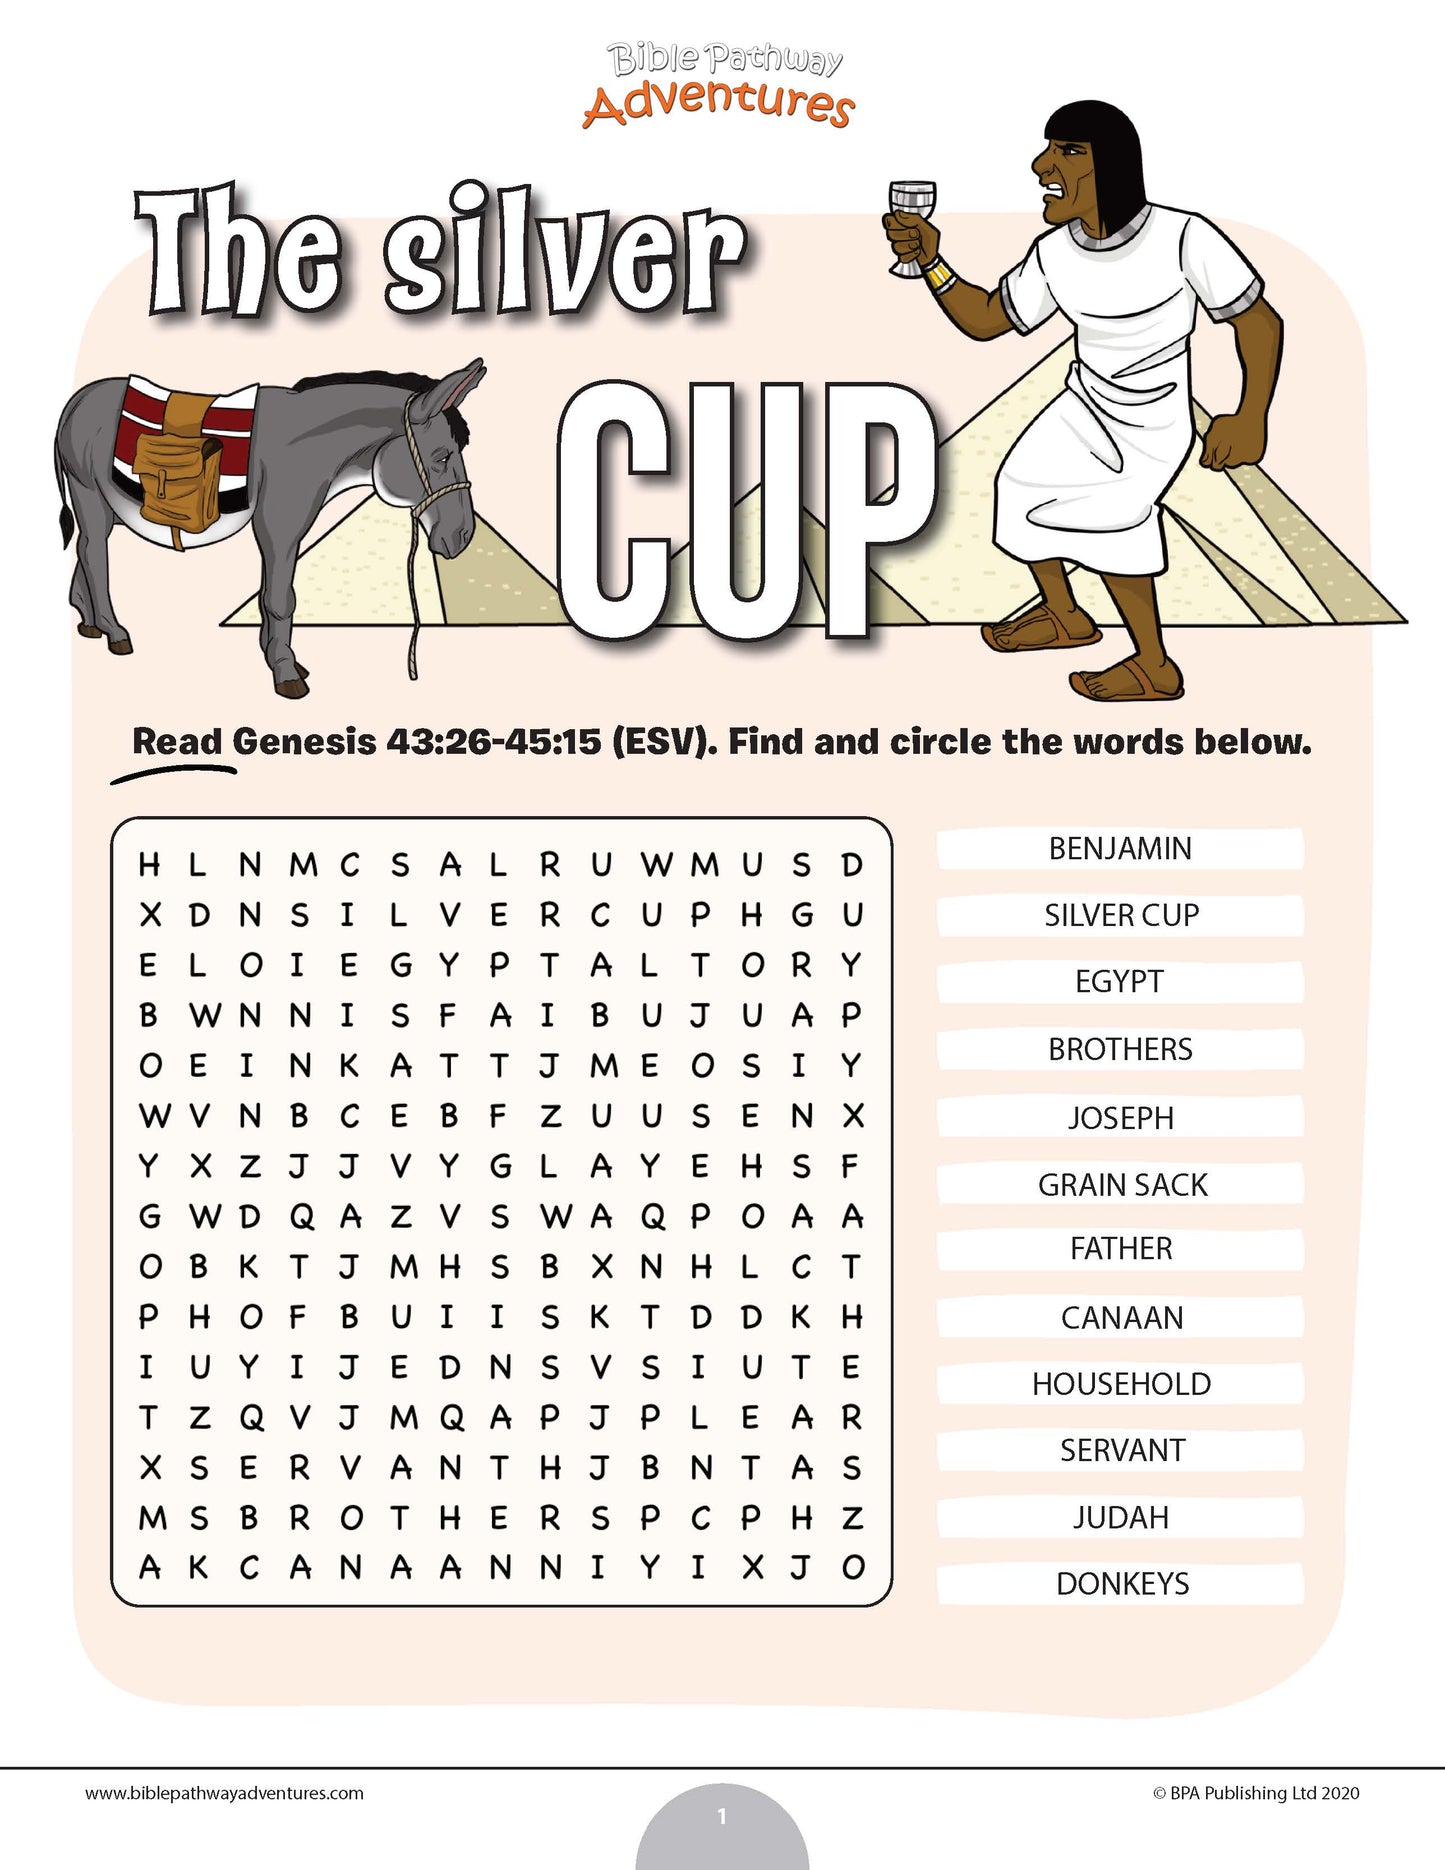 The Silver Cup word search